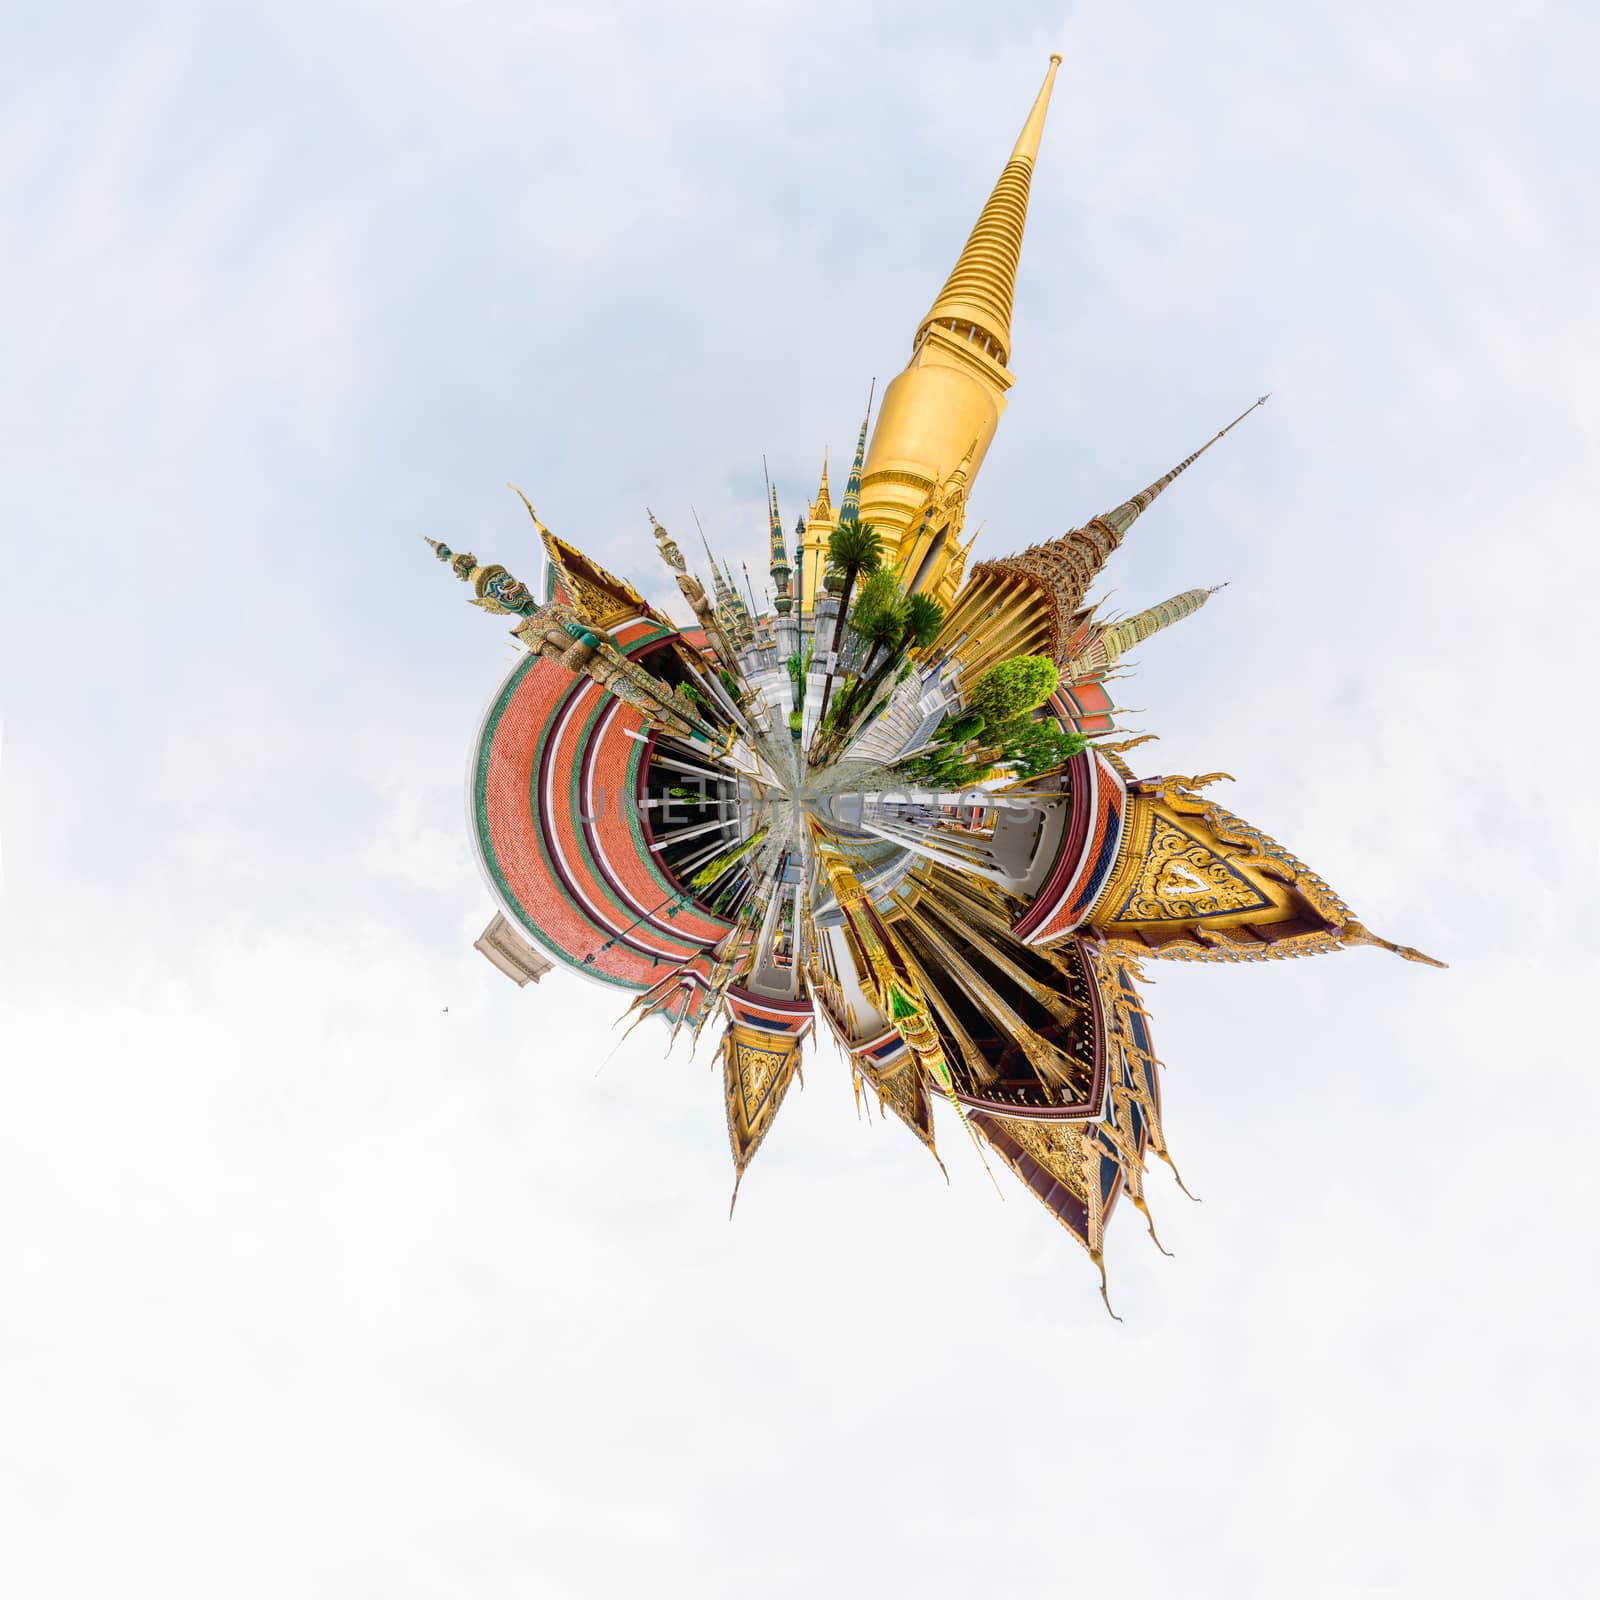 circle panorama of Panning view of Wat Phra Kaew or name The Temple of the Emerald Buddha by rukawajung